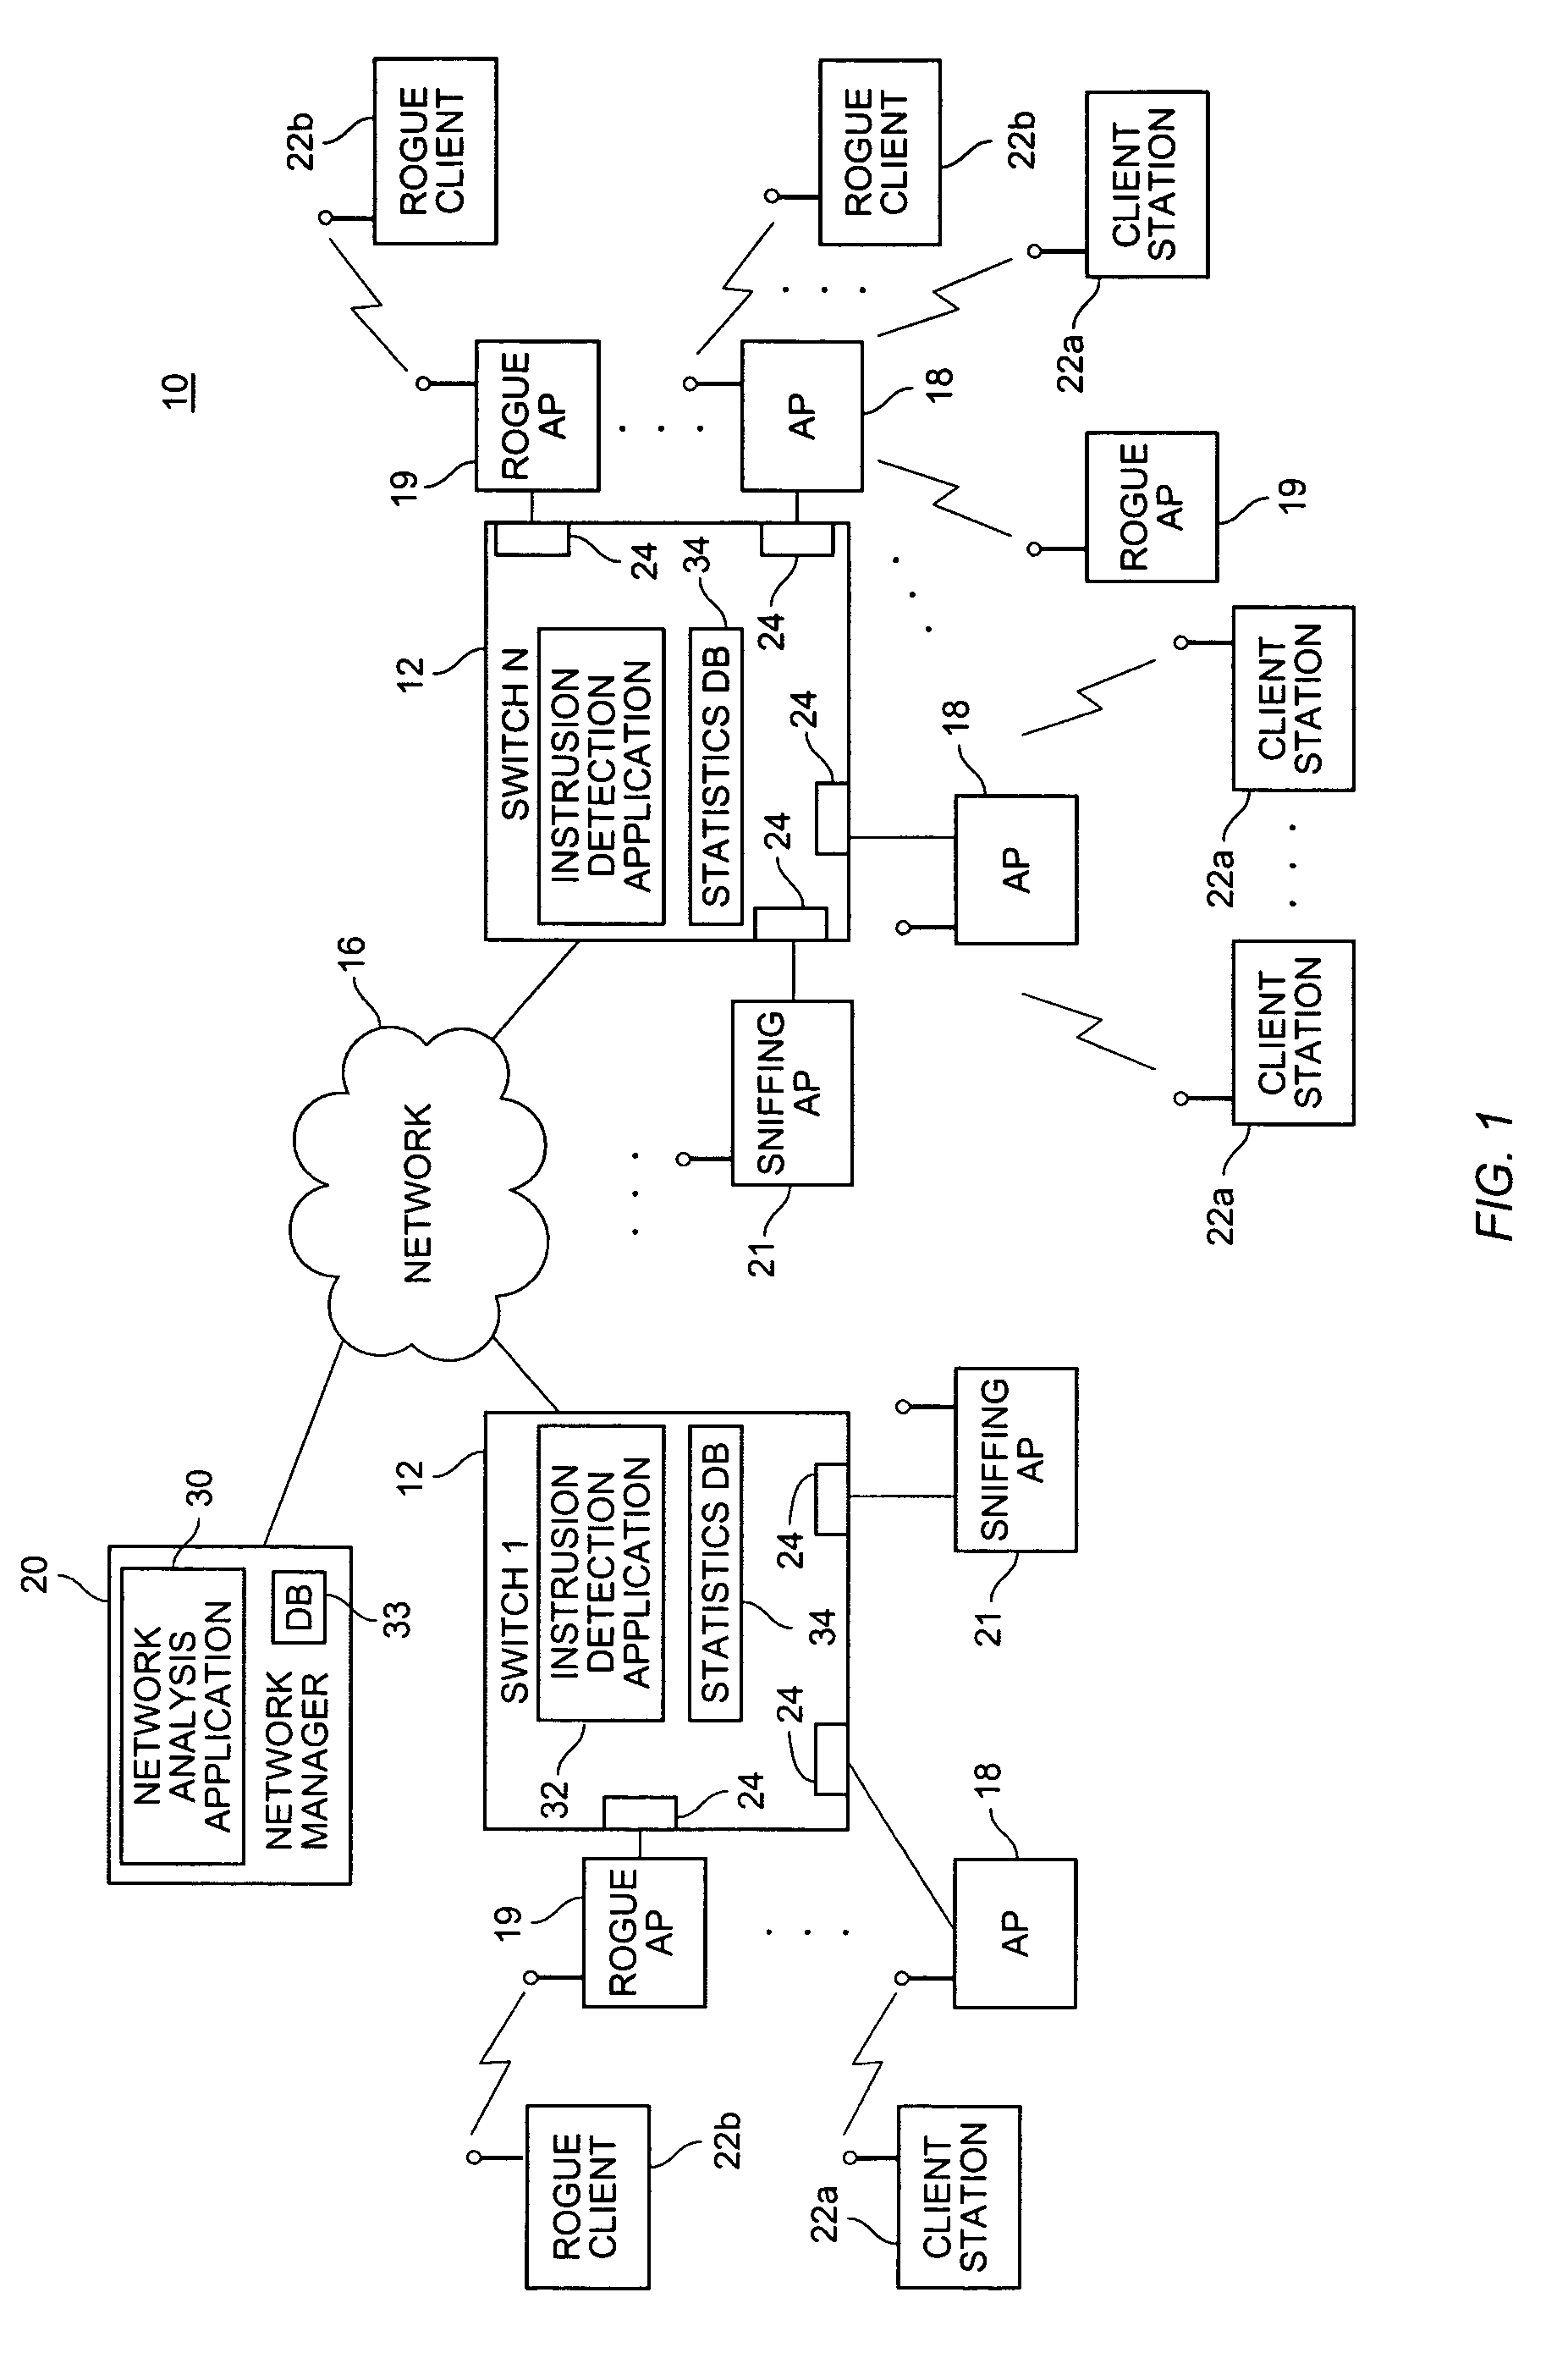 Method and system for detecting and preventing access intrusion in a network